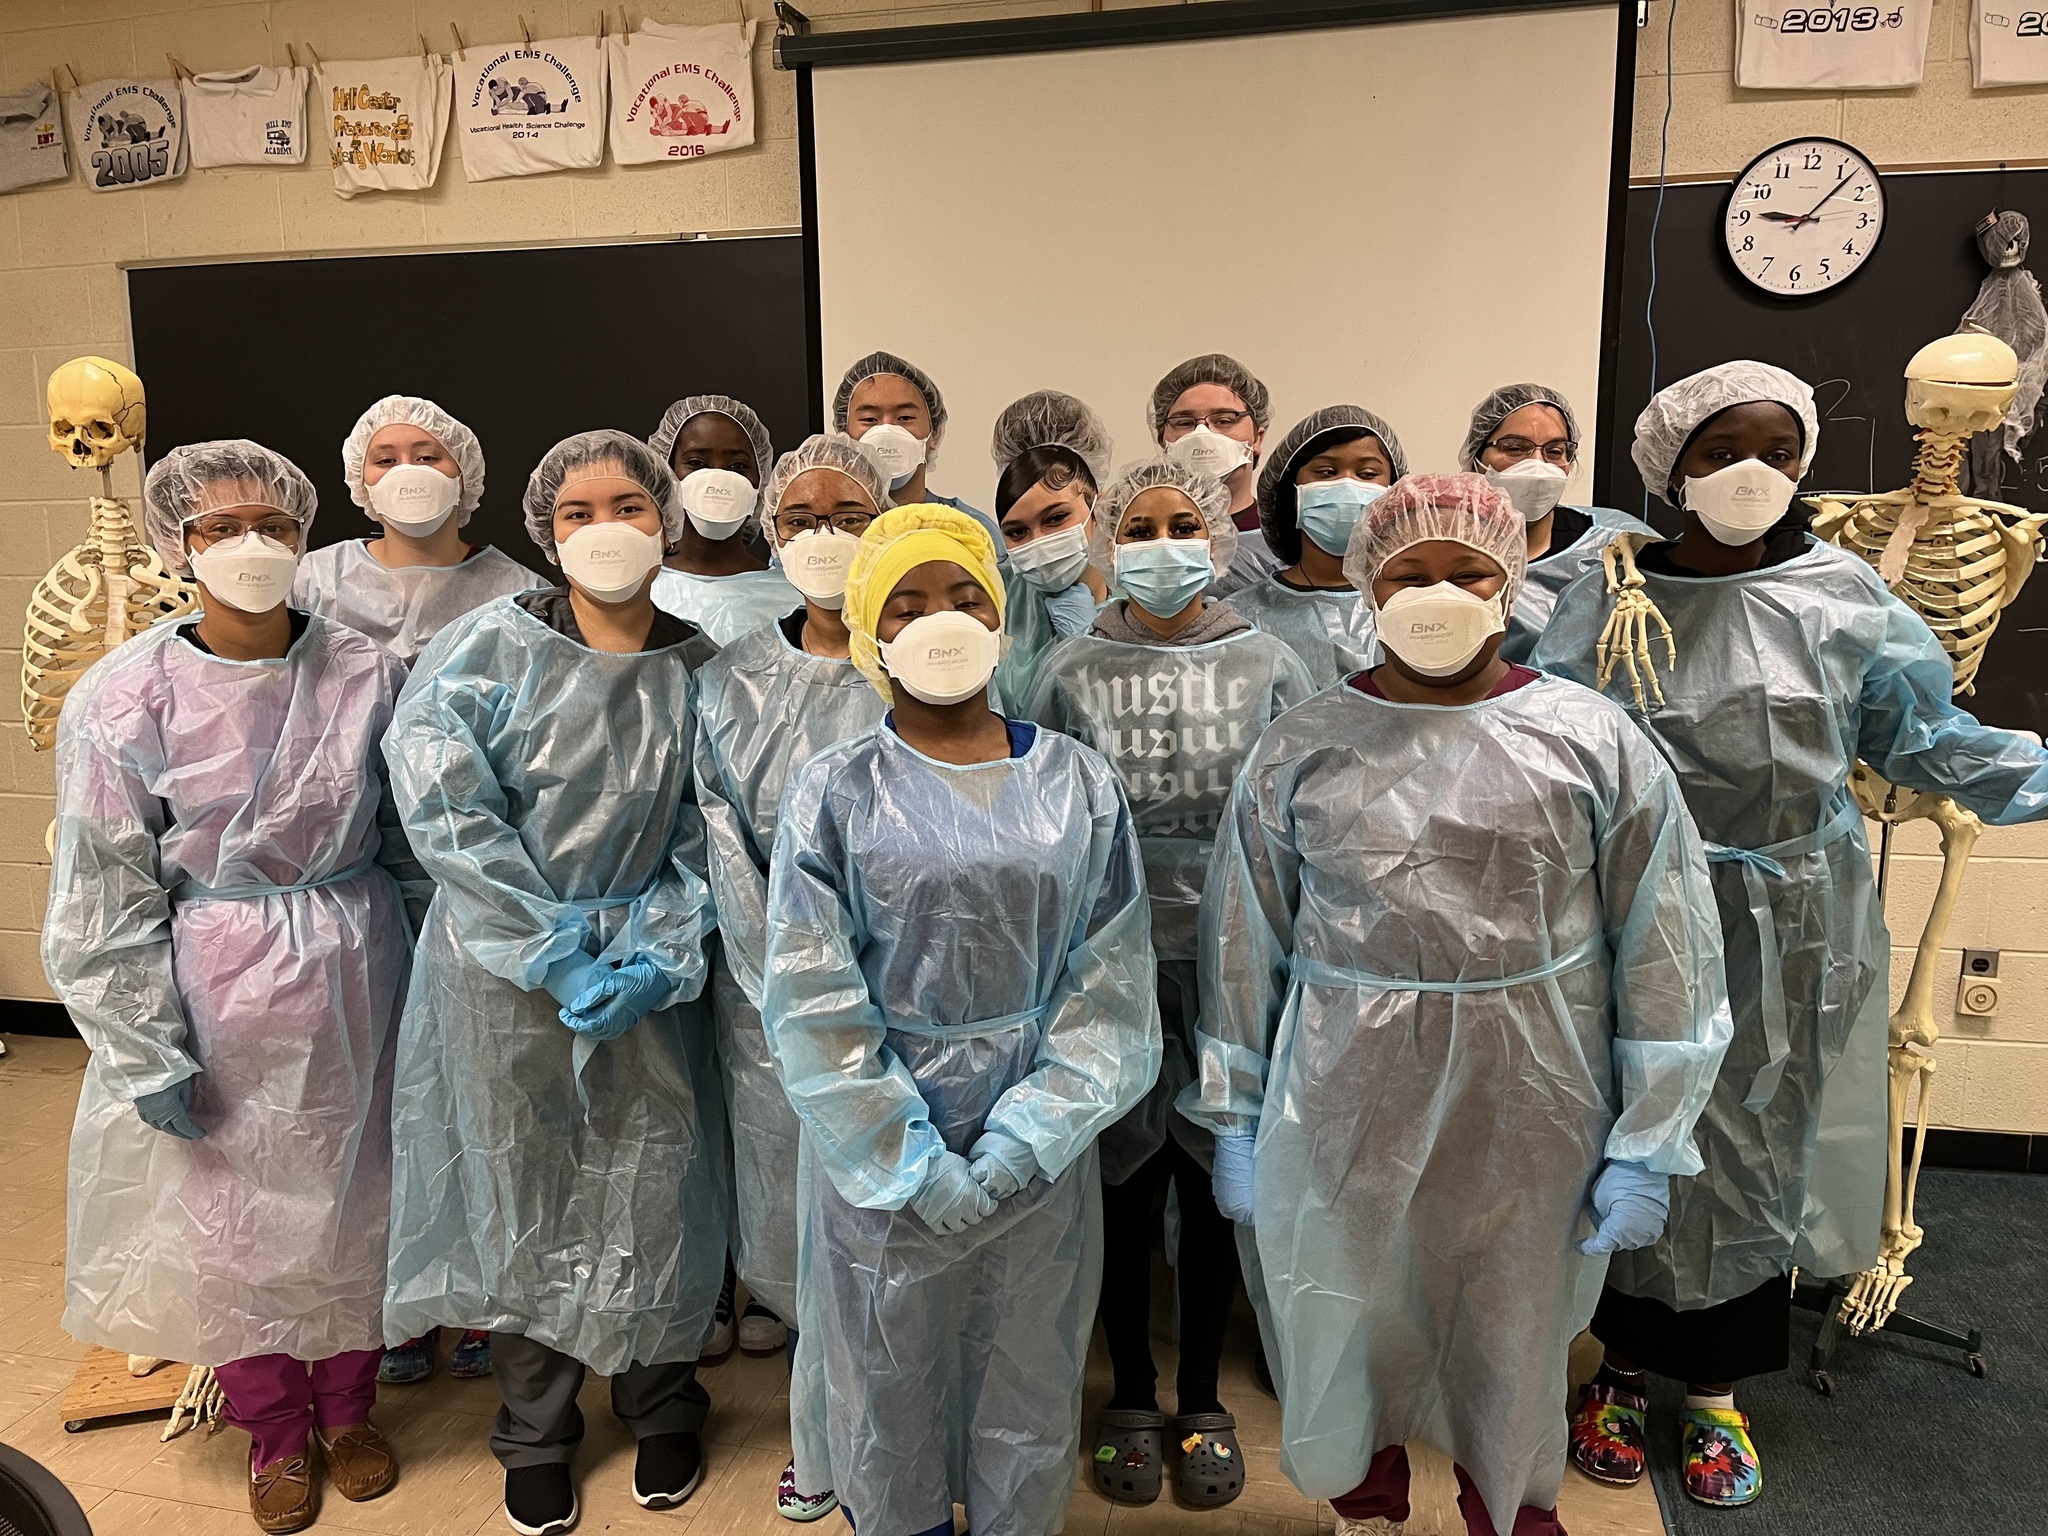 A group of students wearing PPE